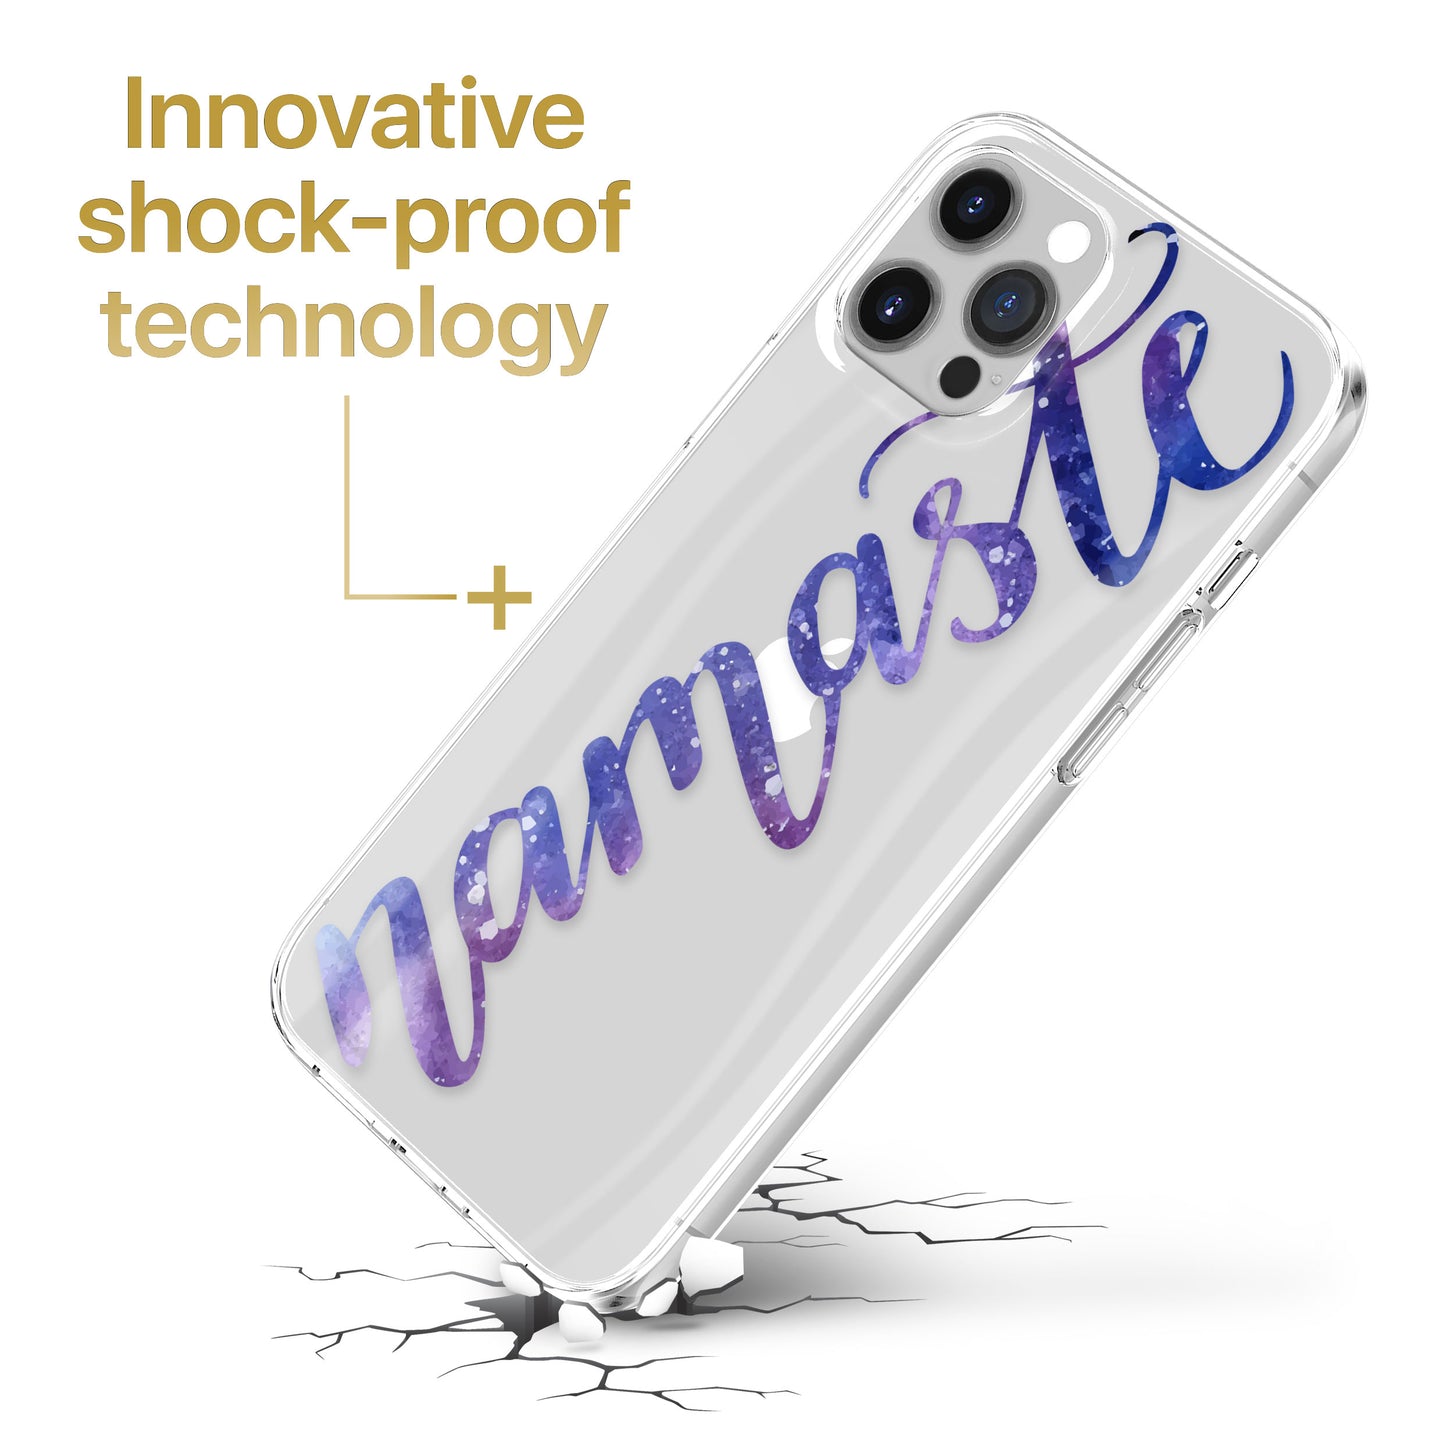 TPU Clear case with (Namaste) Design for iPhone & Samsung Phones